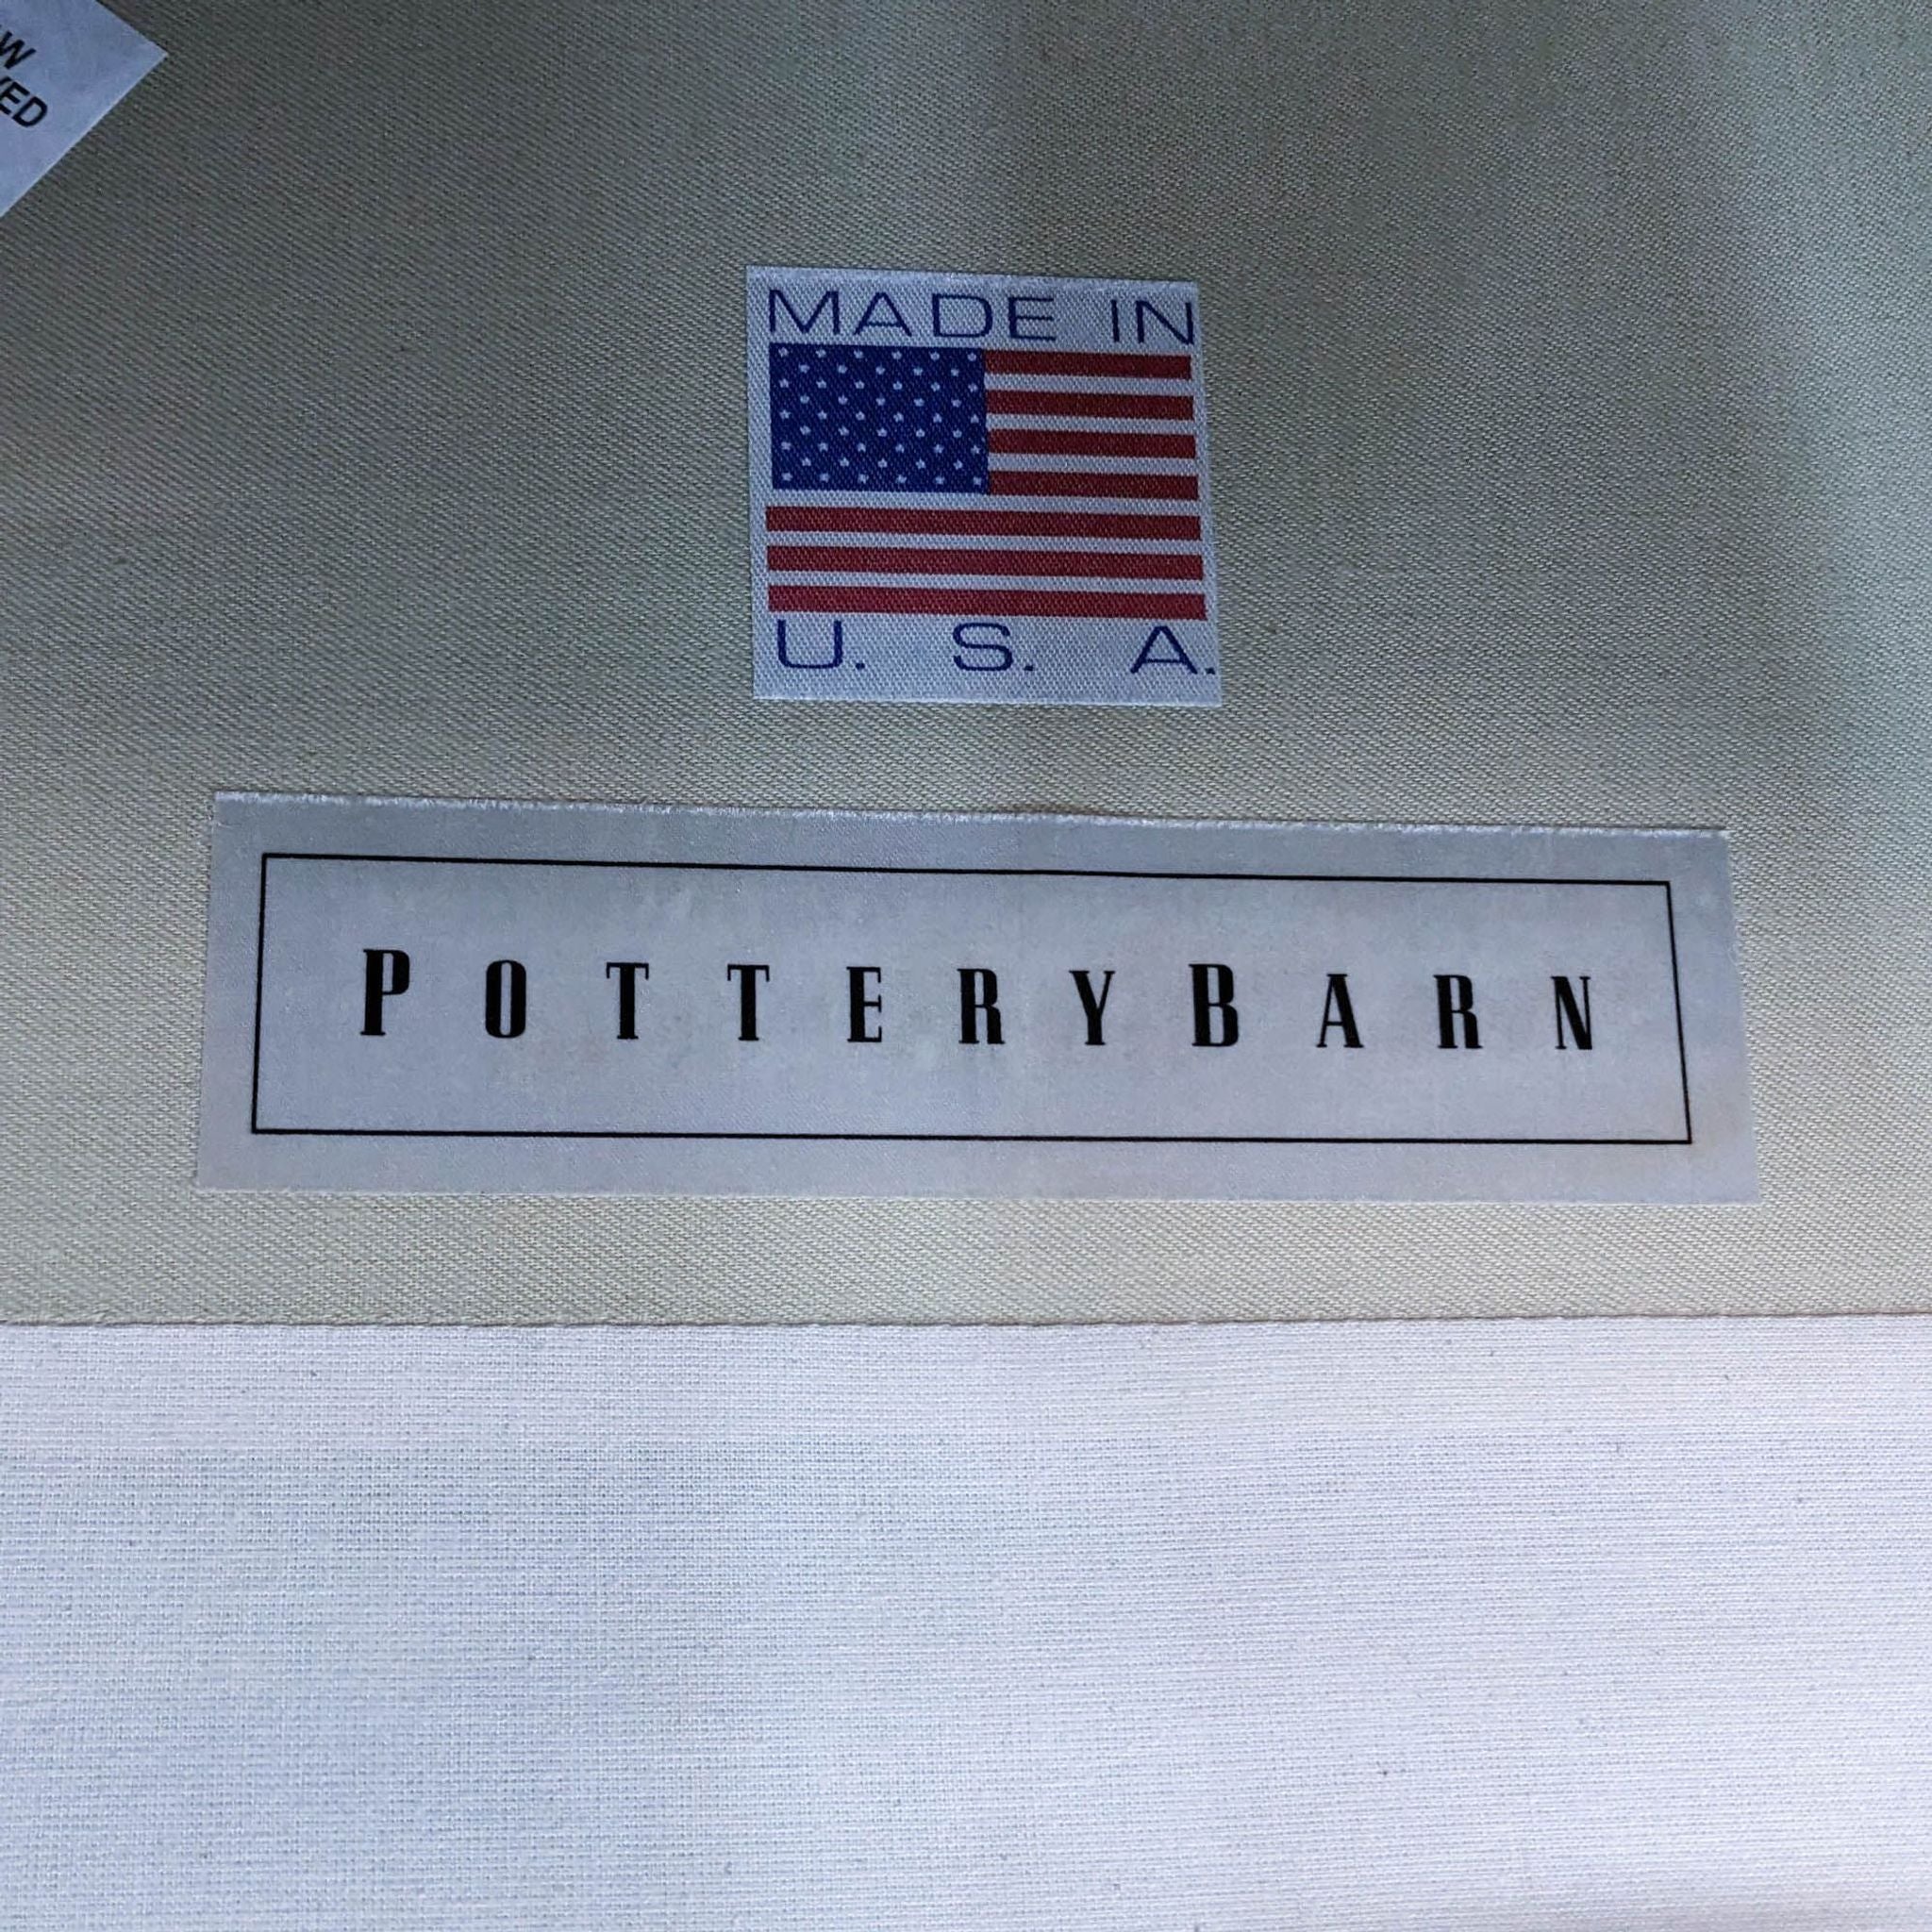 Close-up of a Pottery Barn label on a gray fabric, indicating it is made in the U.S.A.